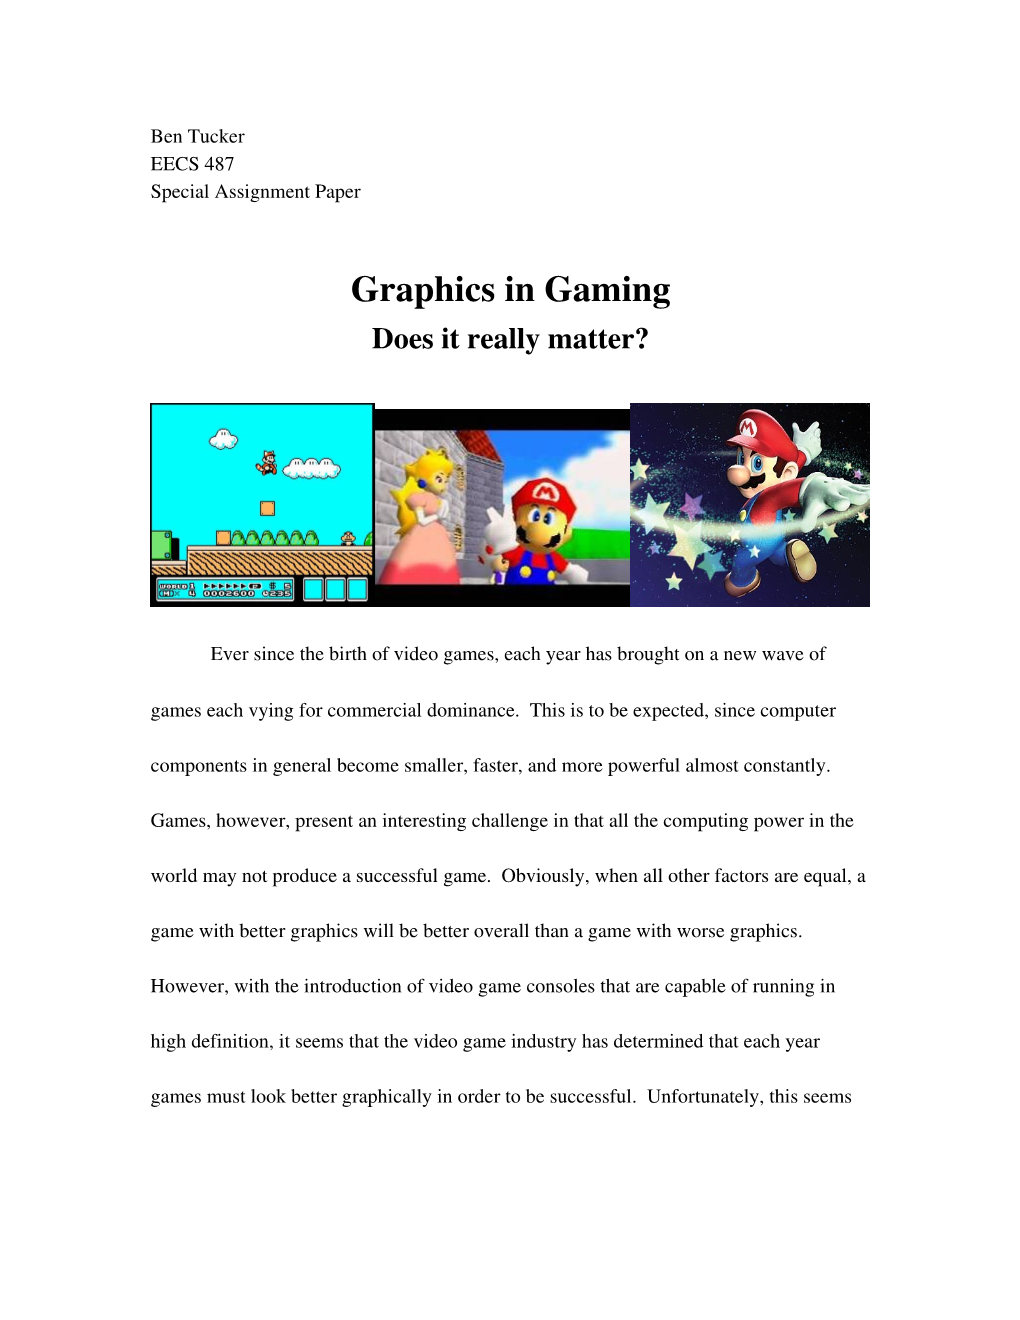 Graphics in Gaming Does It Really Matter?